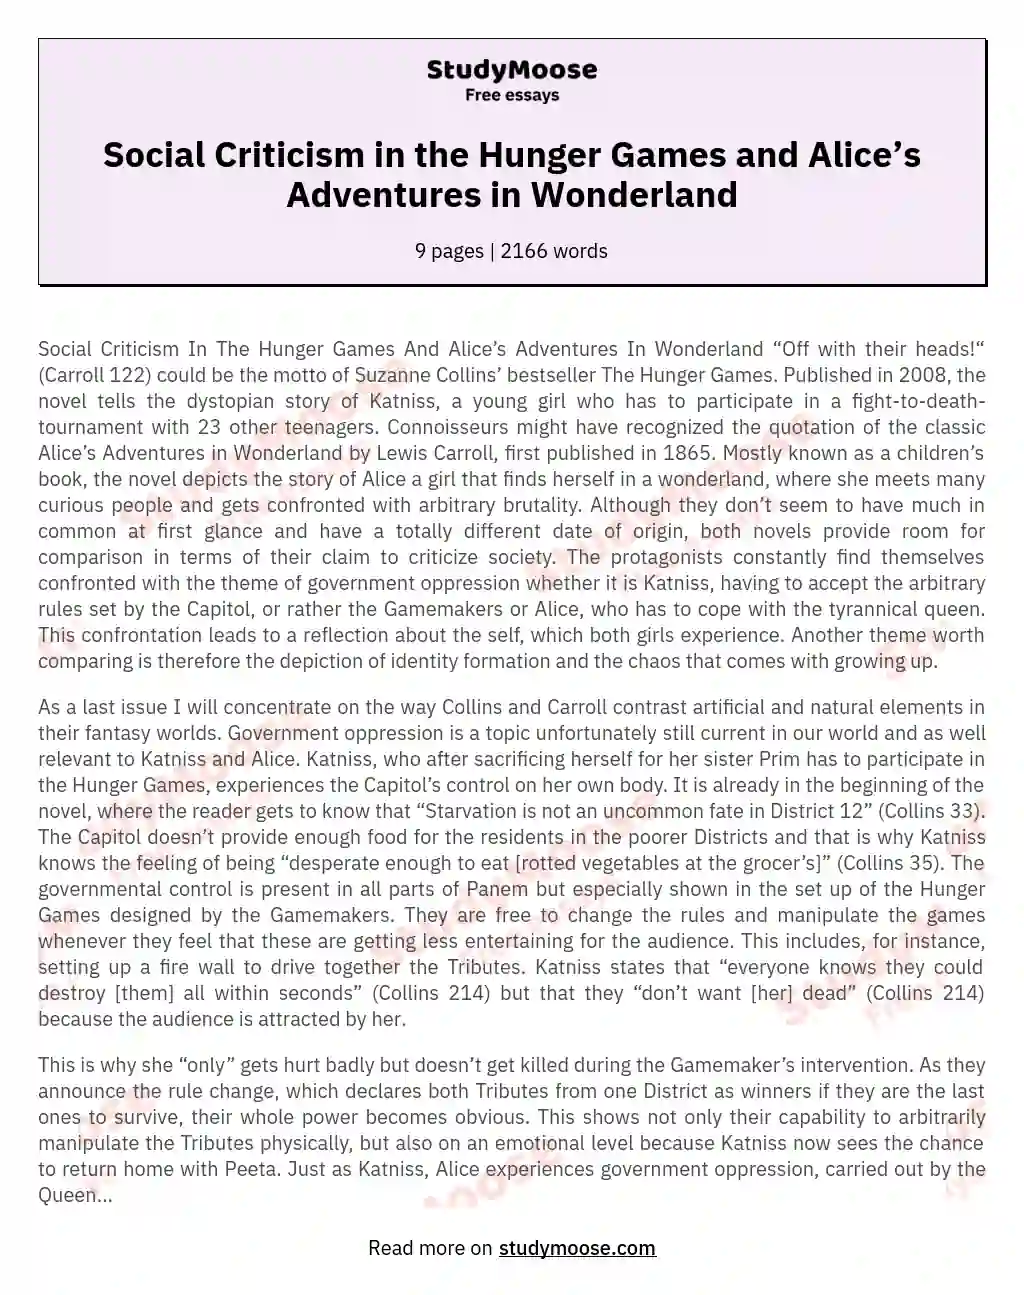 Social Criticism in the Hunger Games and Alice’s Adventures in Wonderland